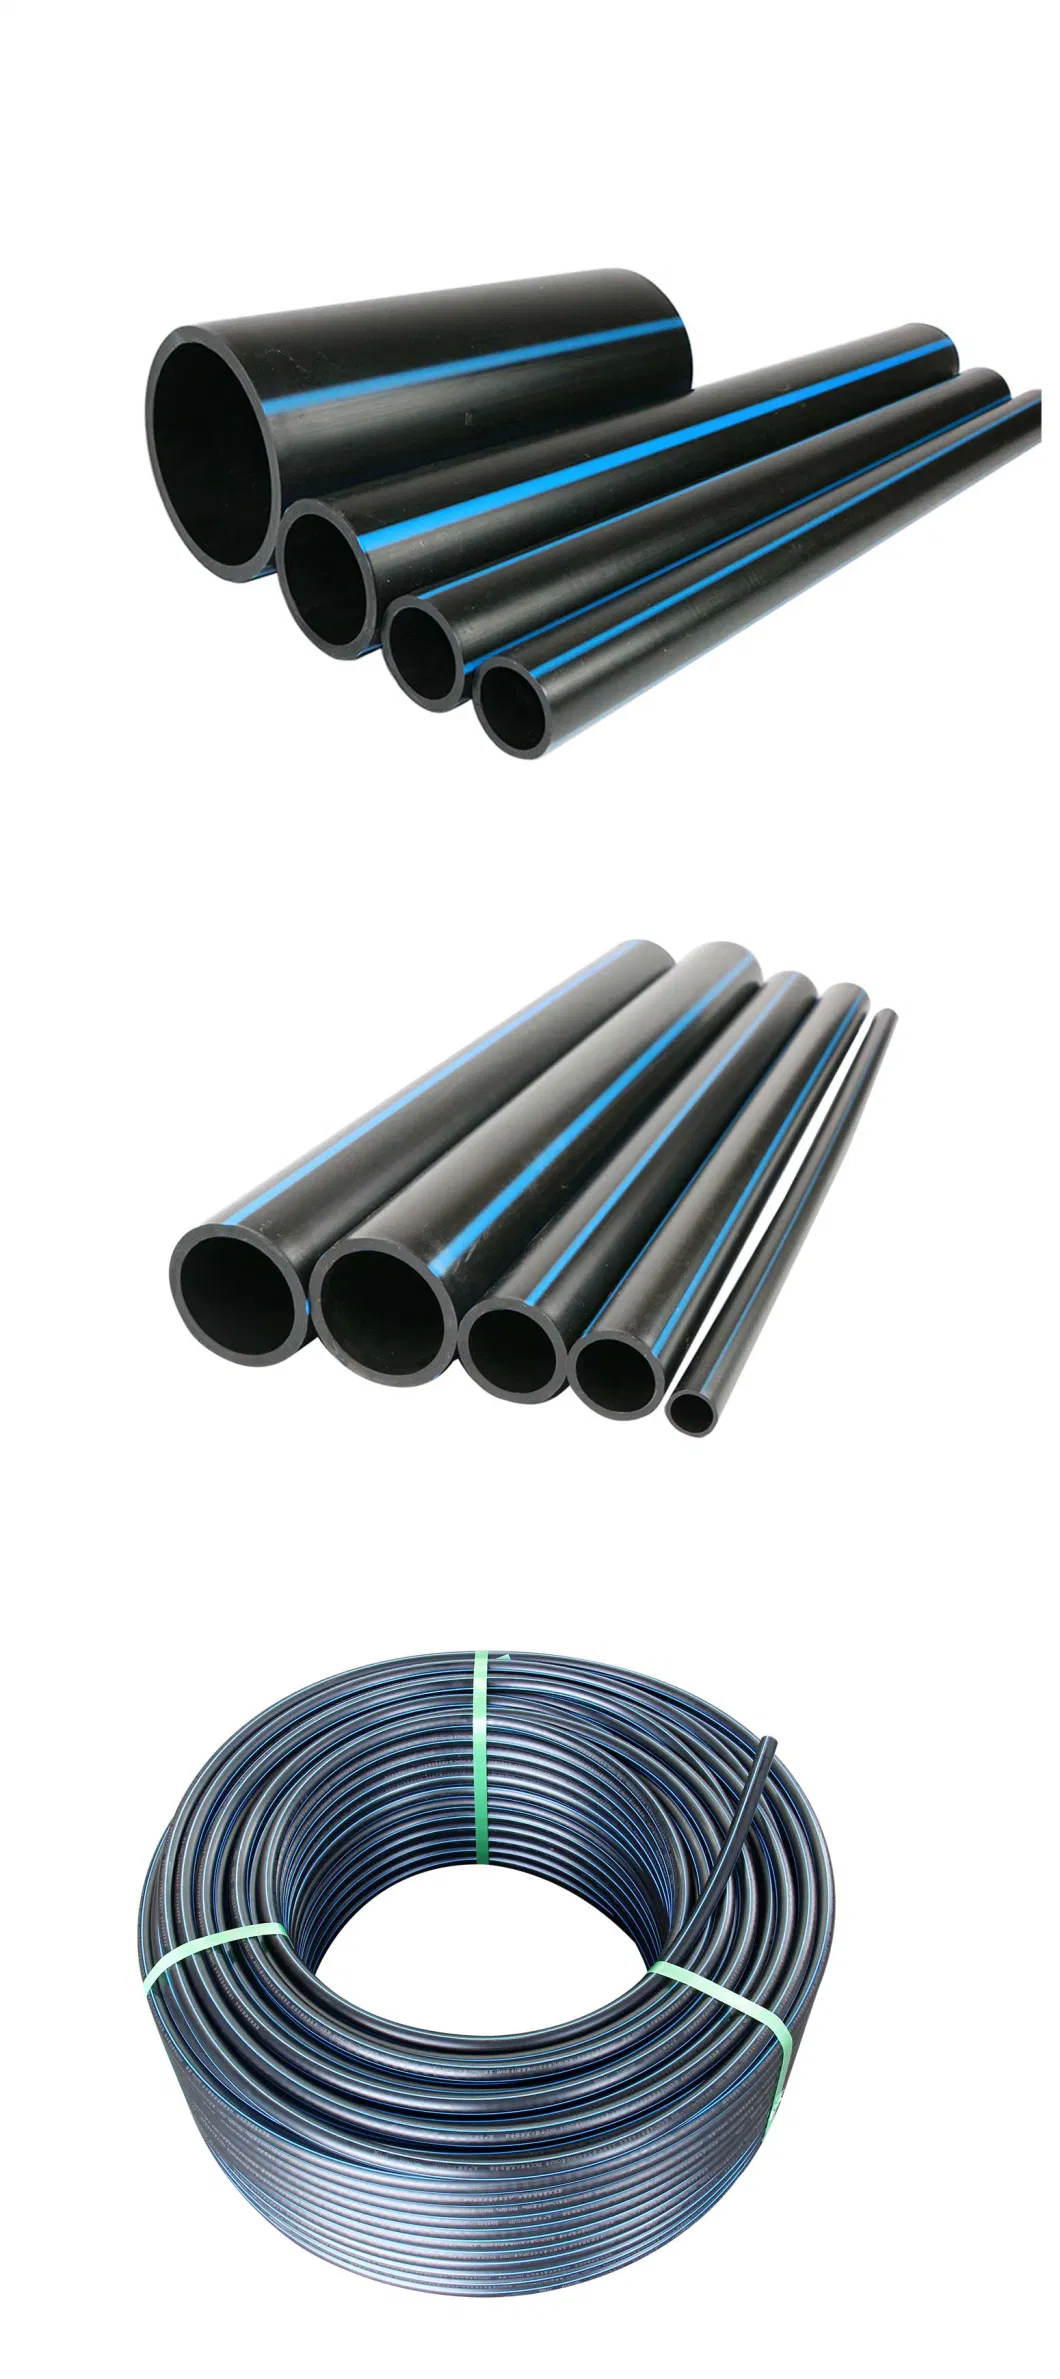 PE100 Black Plastic PE Pipe HDPE Pipe for Water Supply/Building/Gas/Agriculture Irrigation/Garden/Greenhouse/Chemical/Coupling/Fishing HDPE